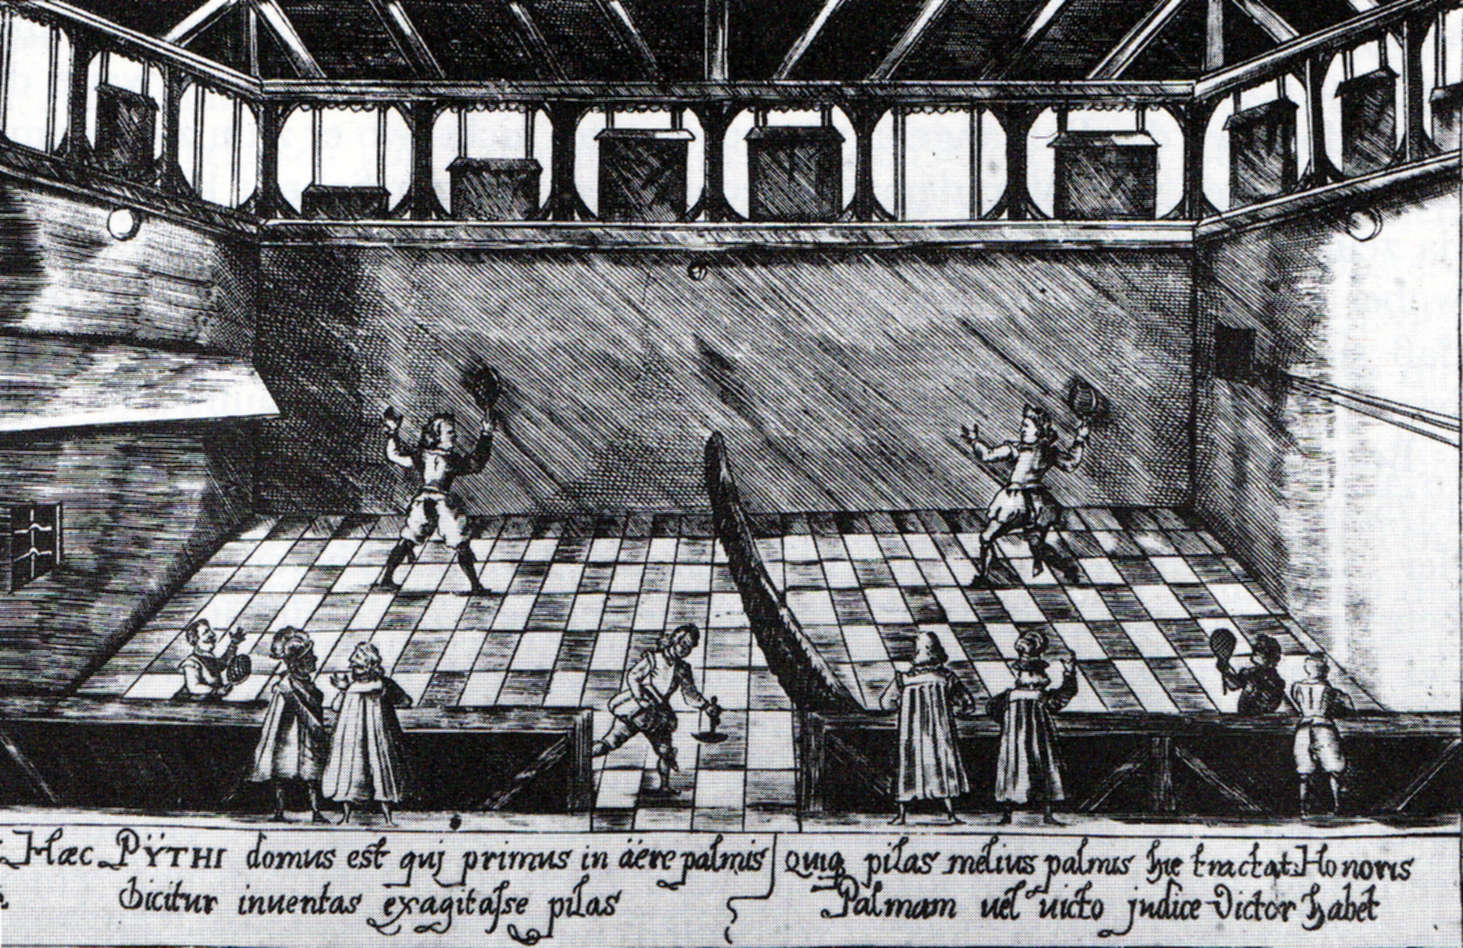 Copper engraving of a tennis game at the College Illustre (university) of Tübingen, Germany